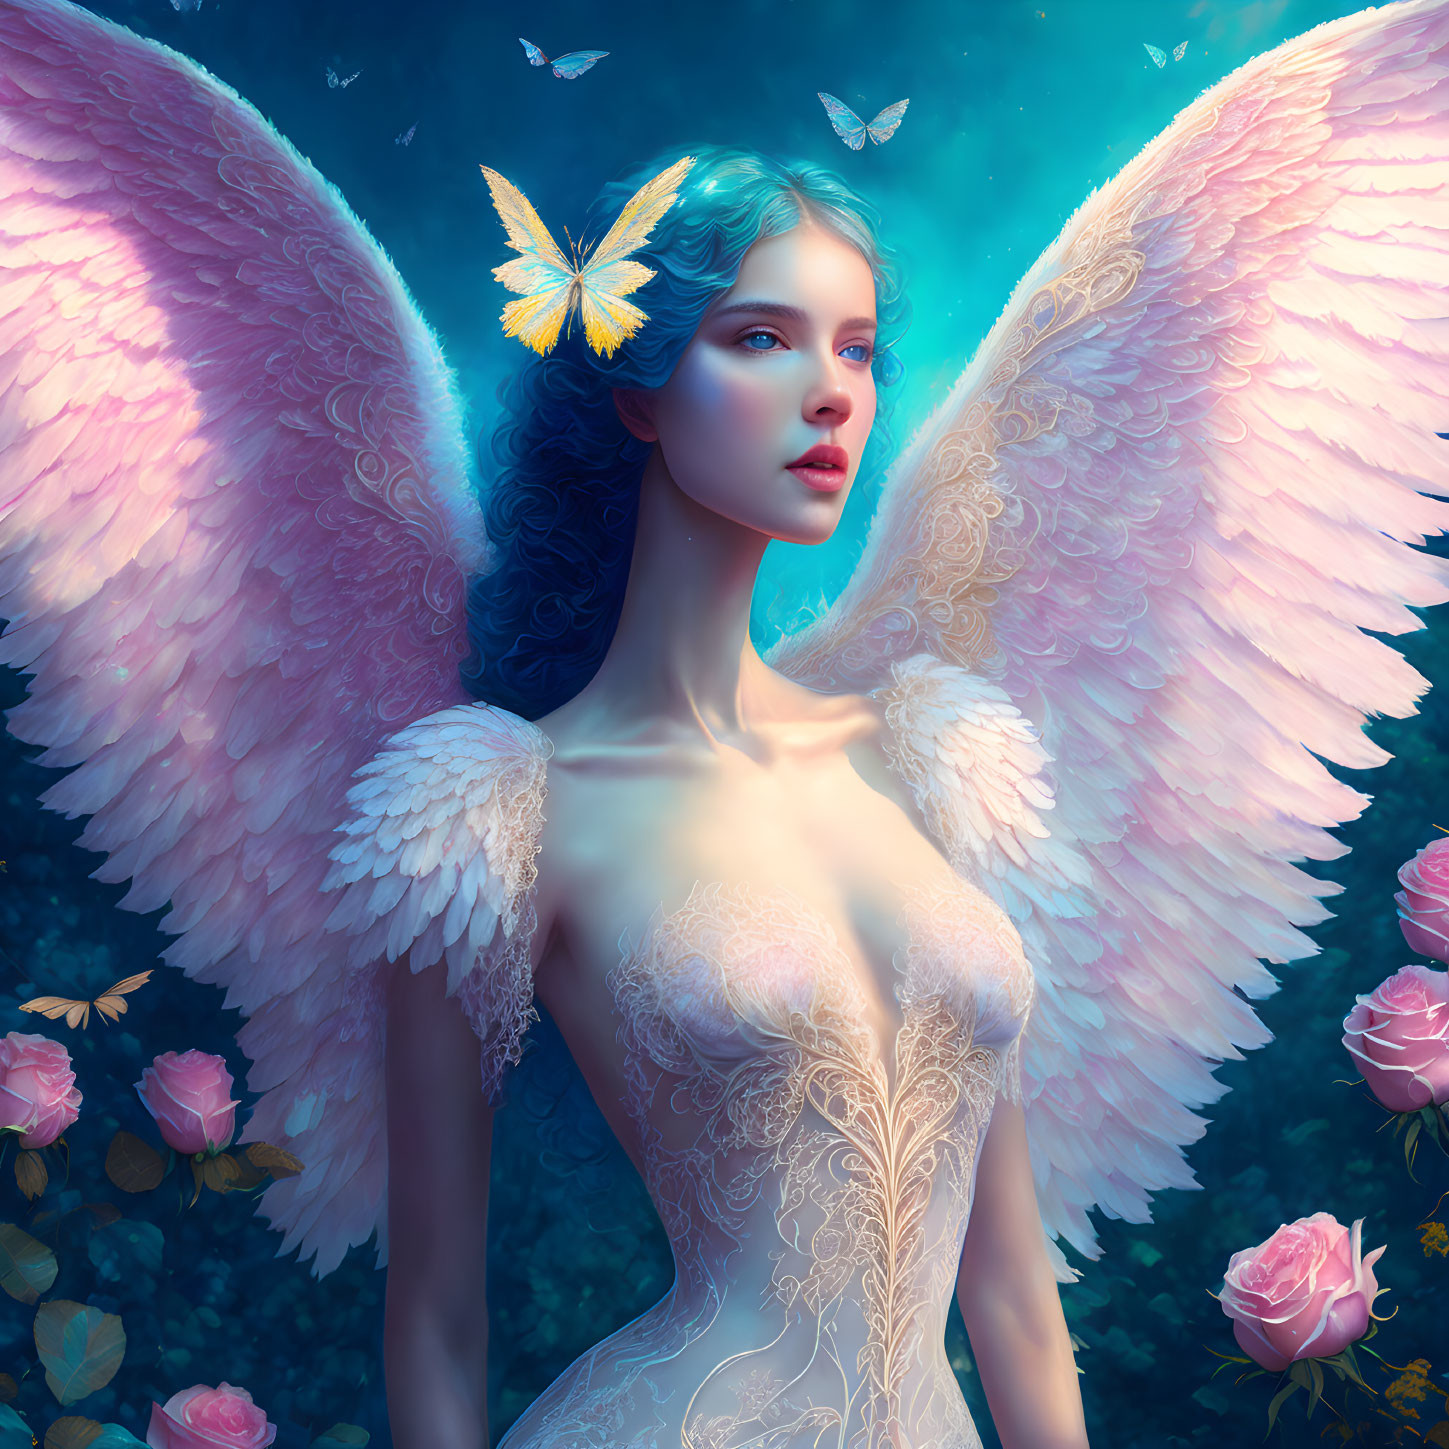 Fantasy illustration of woman with pink wings, roses, and butterflies on blue backdrop